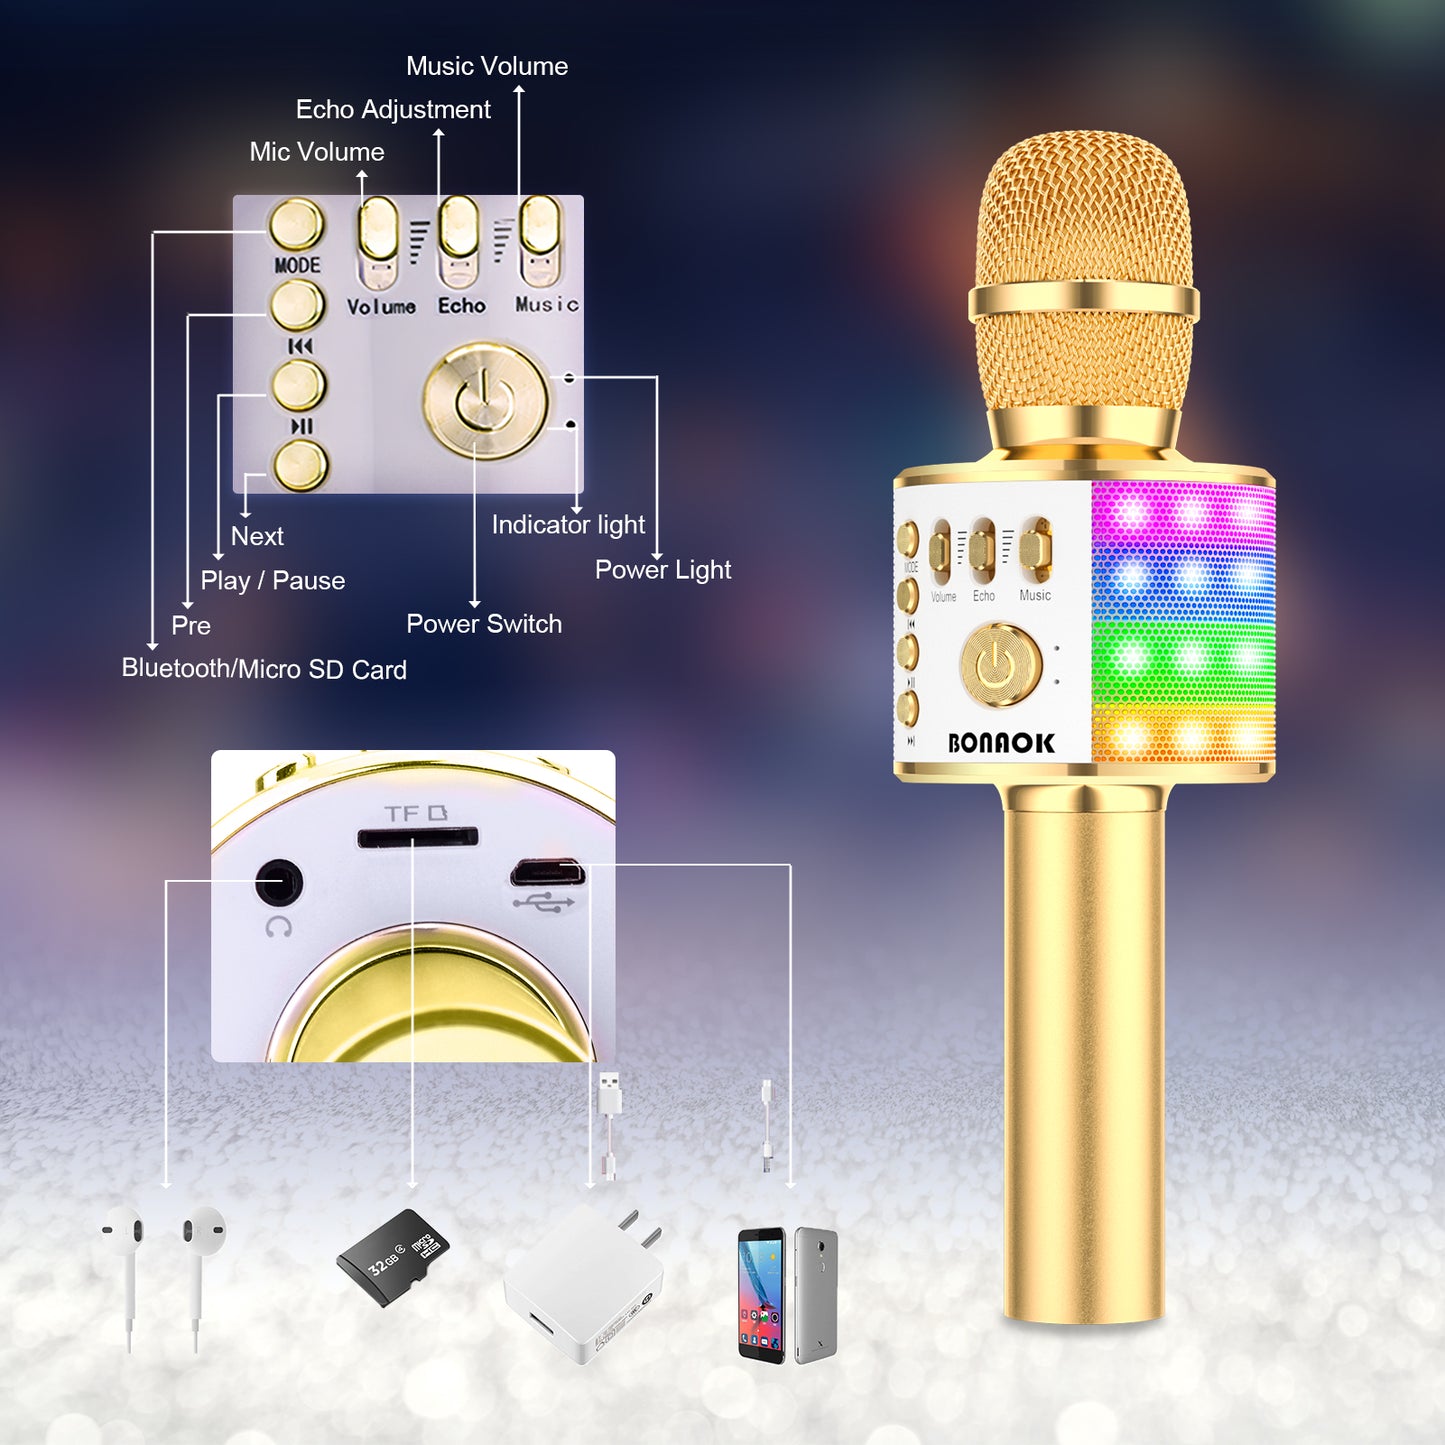 BONAOK Wireless Karaoke Microphone for Kids, Portable Handheld Bluetooth Mic & Speaker for Singing, Toys for Boys Girls 5 6 7 8 9 10 Years Old Teens Adults Birthday Gifts Q37L(Gold)